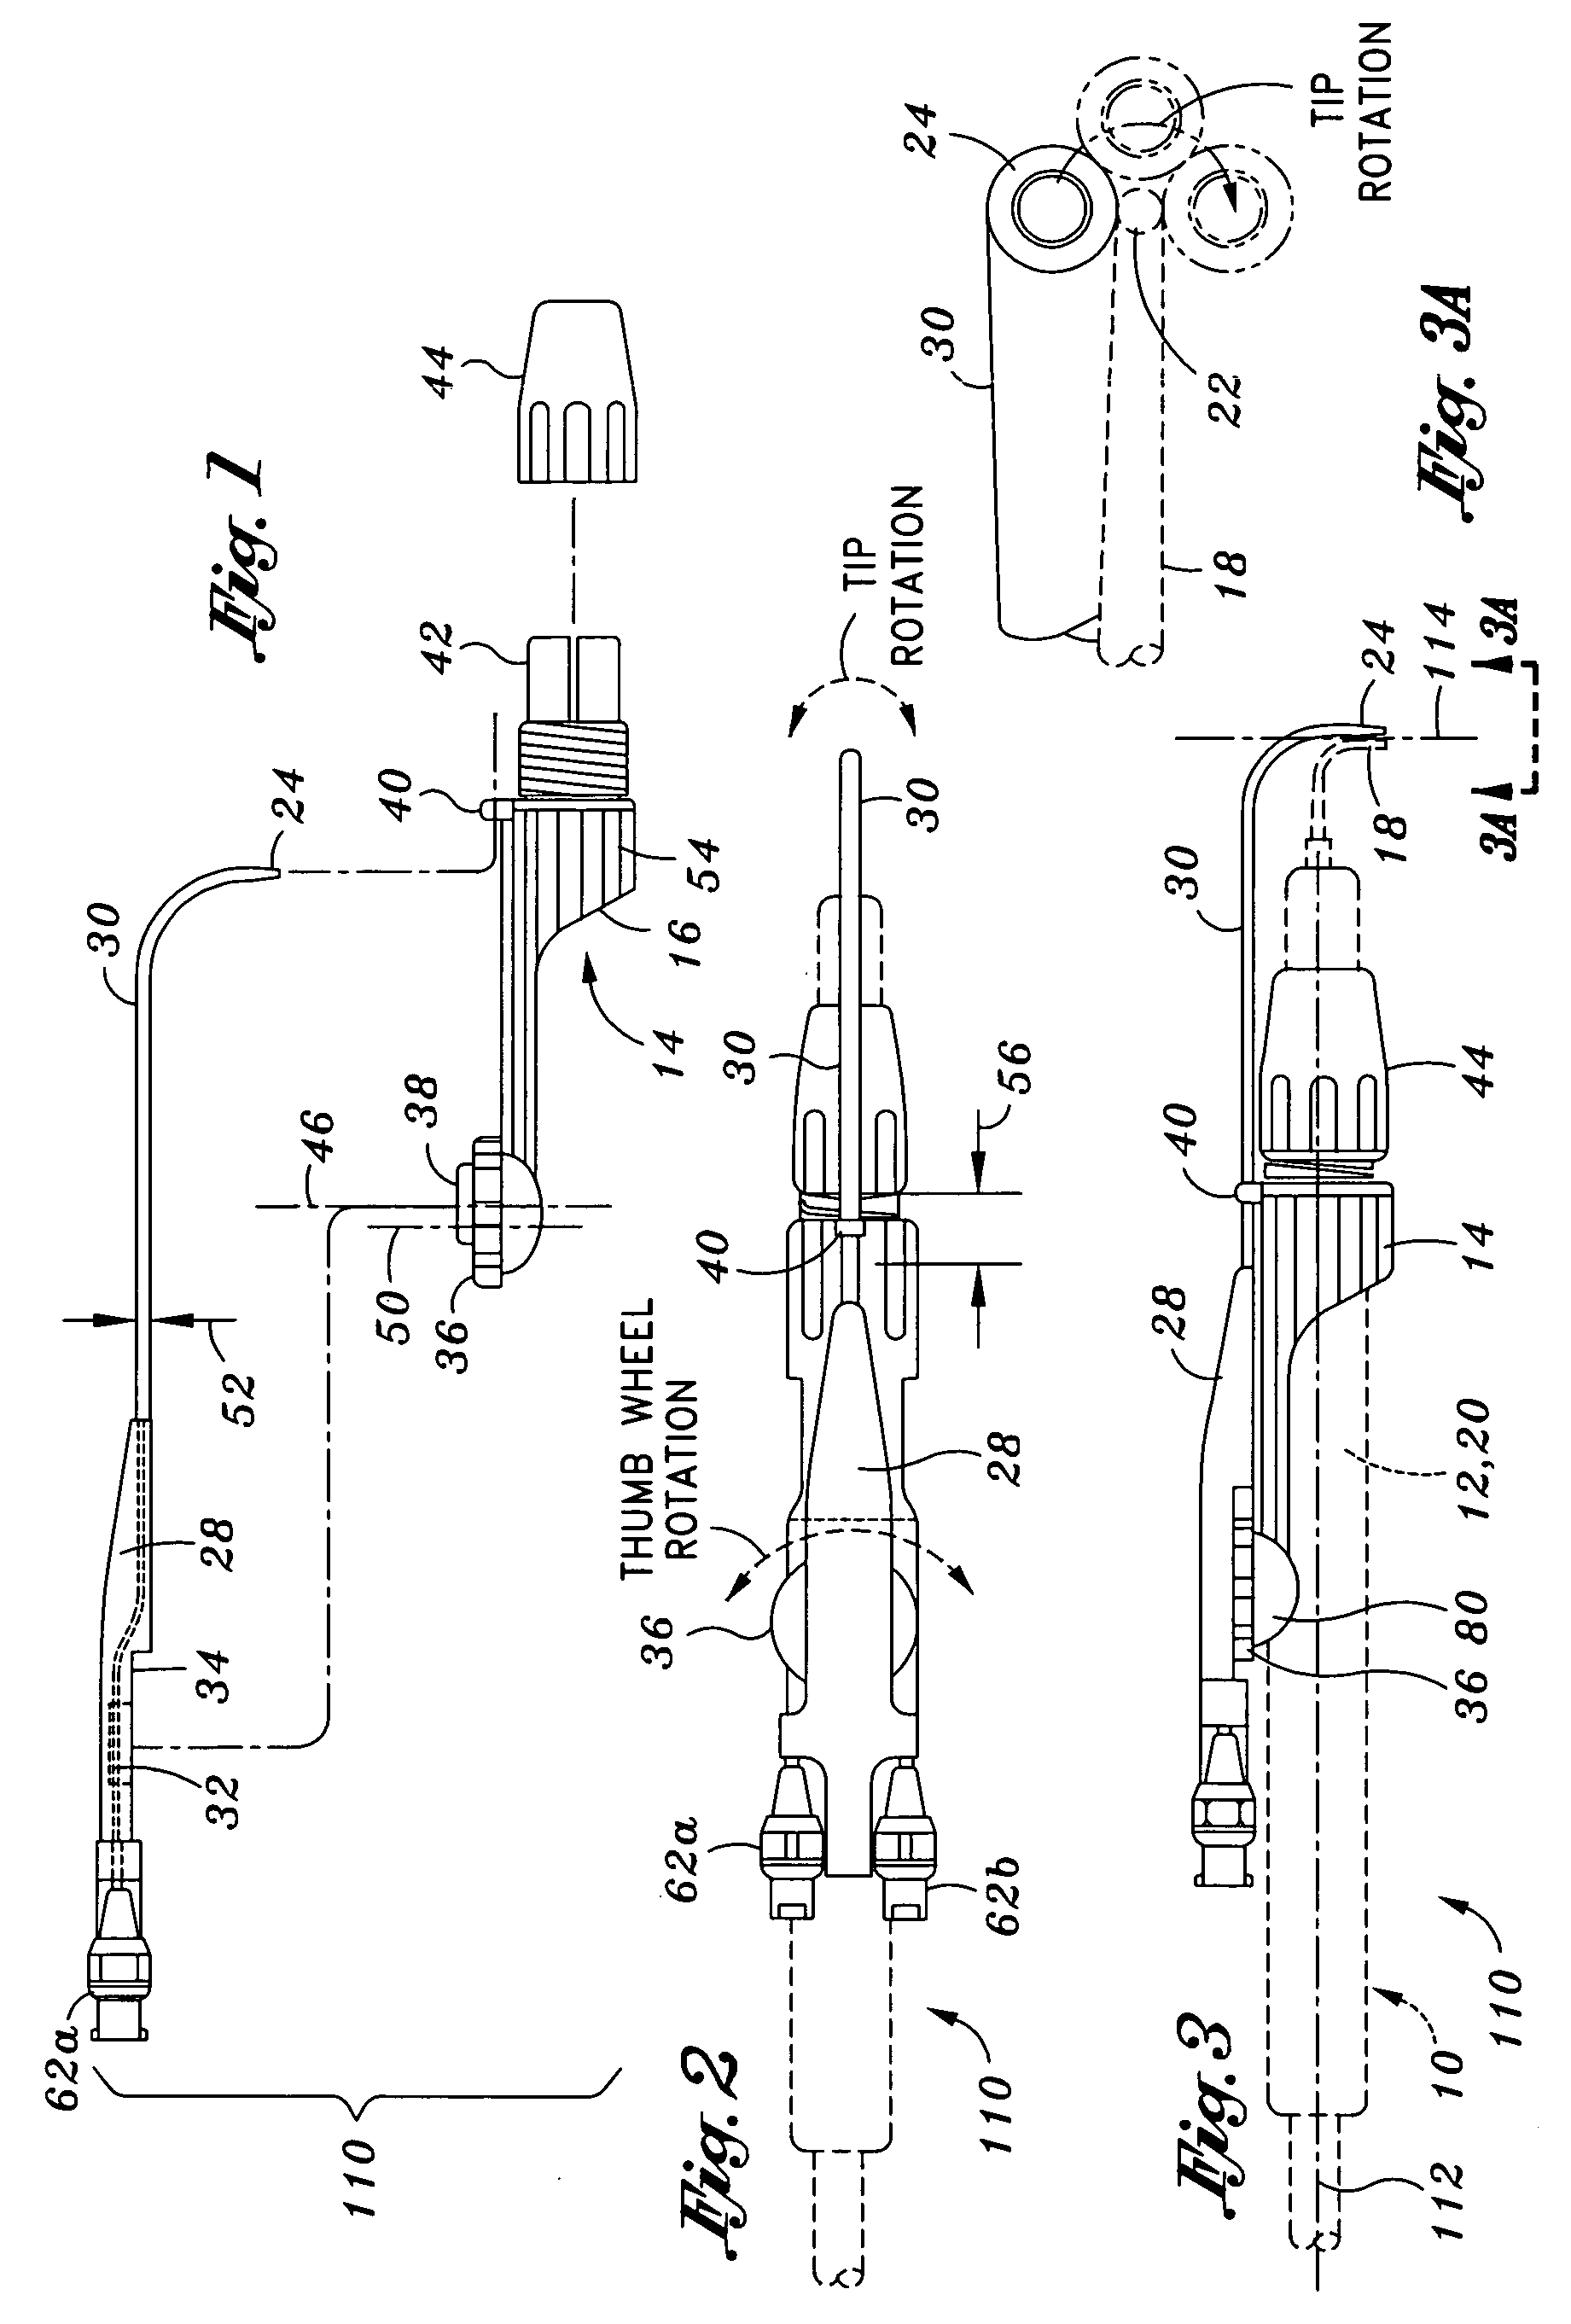 Adapter for integrating an endoscope and ultrasonic scaler